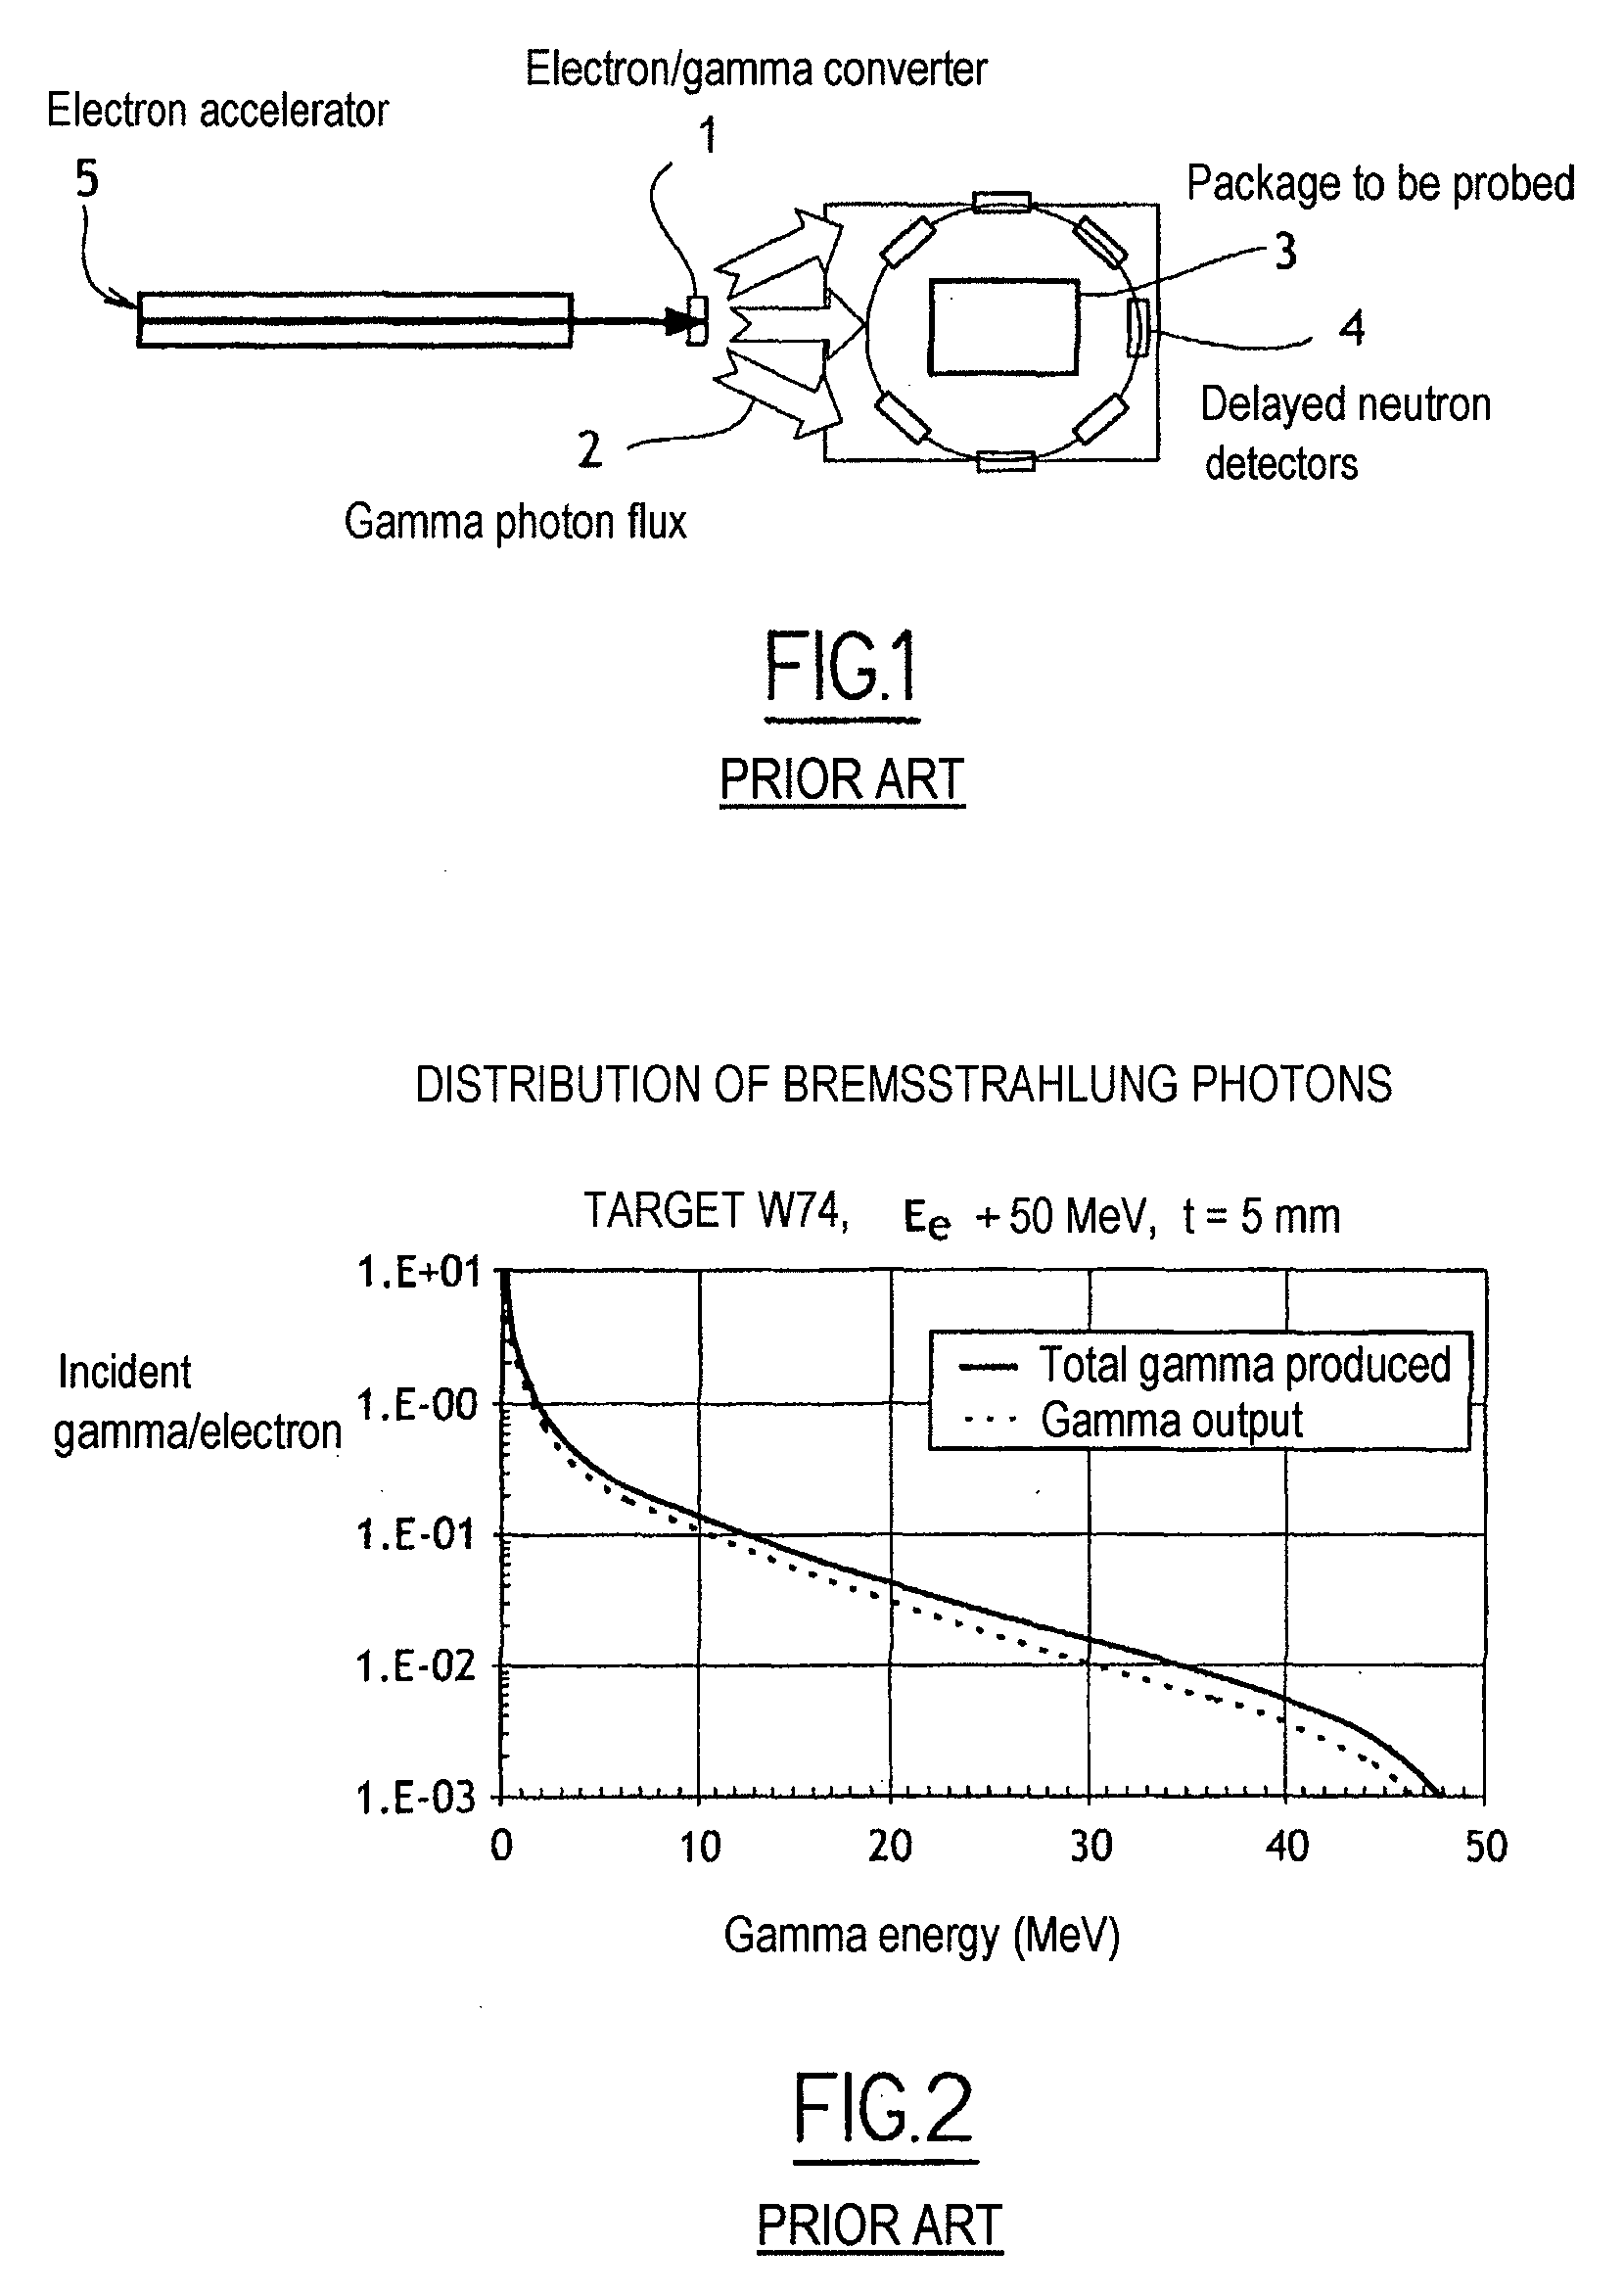 Method And Apparatus For Probing Nuclear Material By Photofission